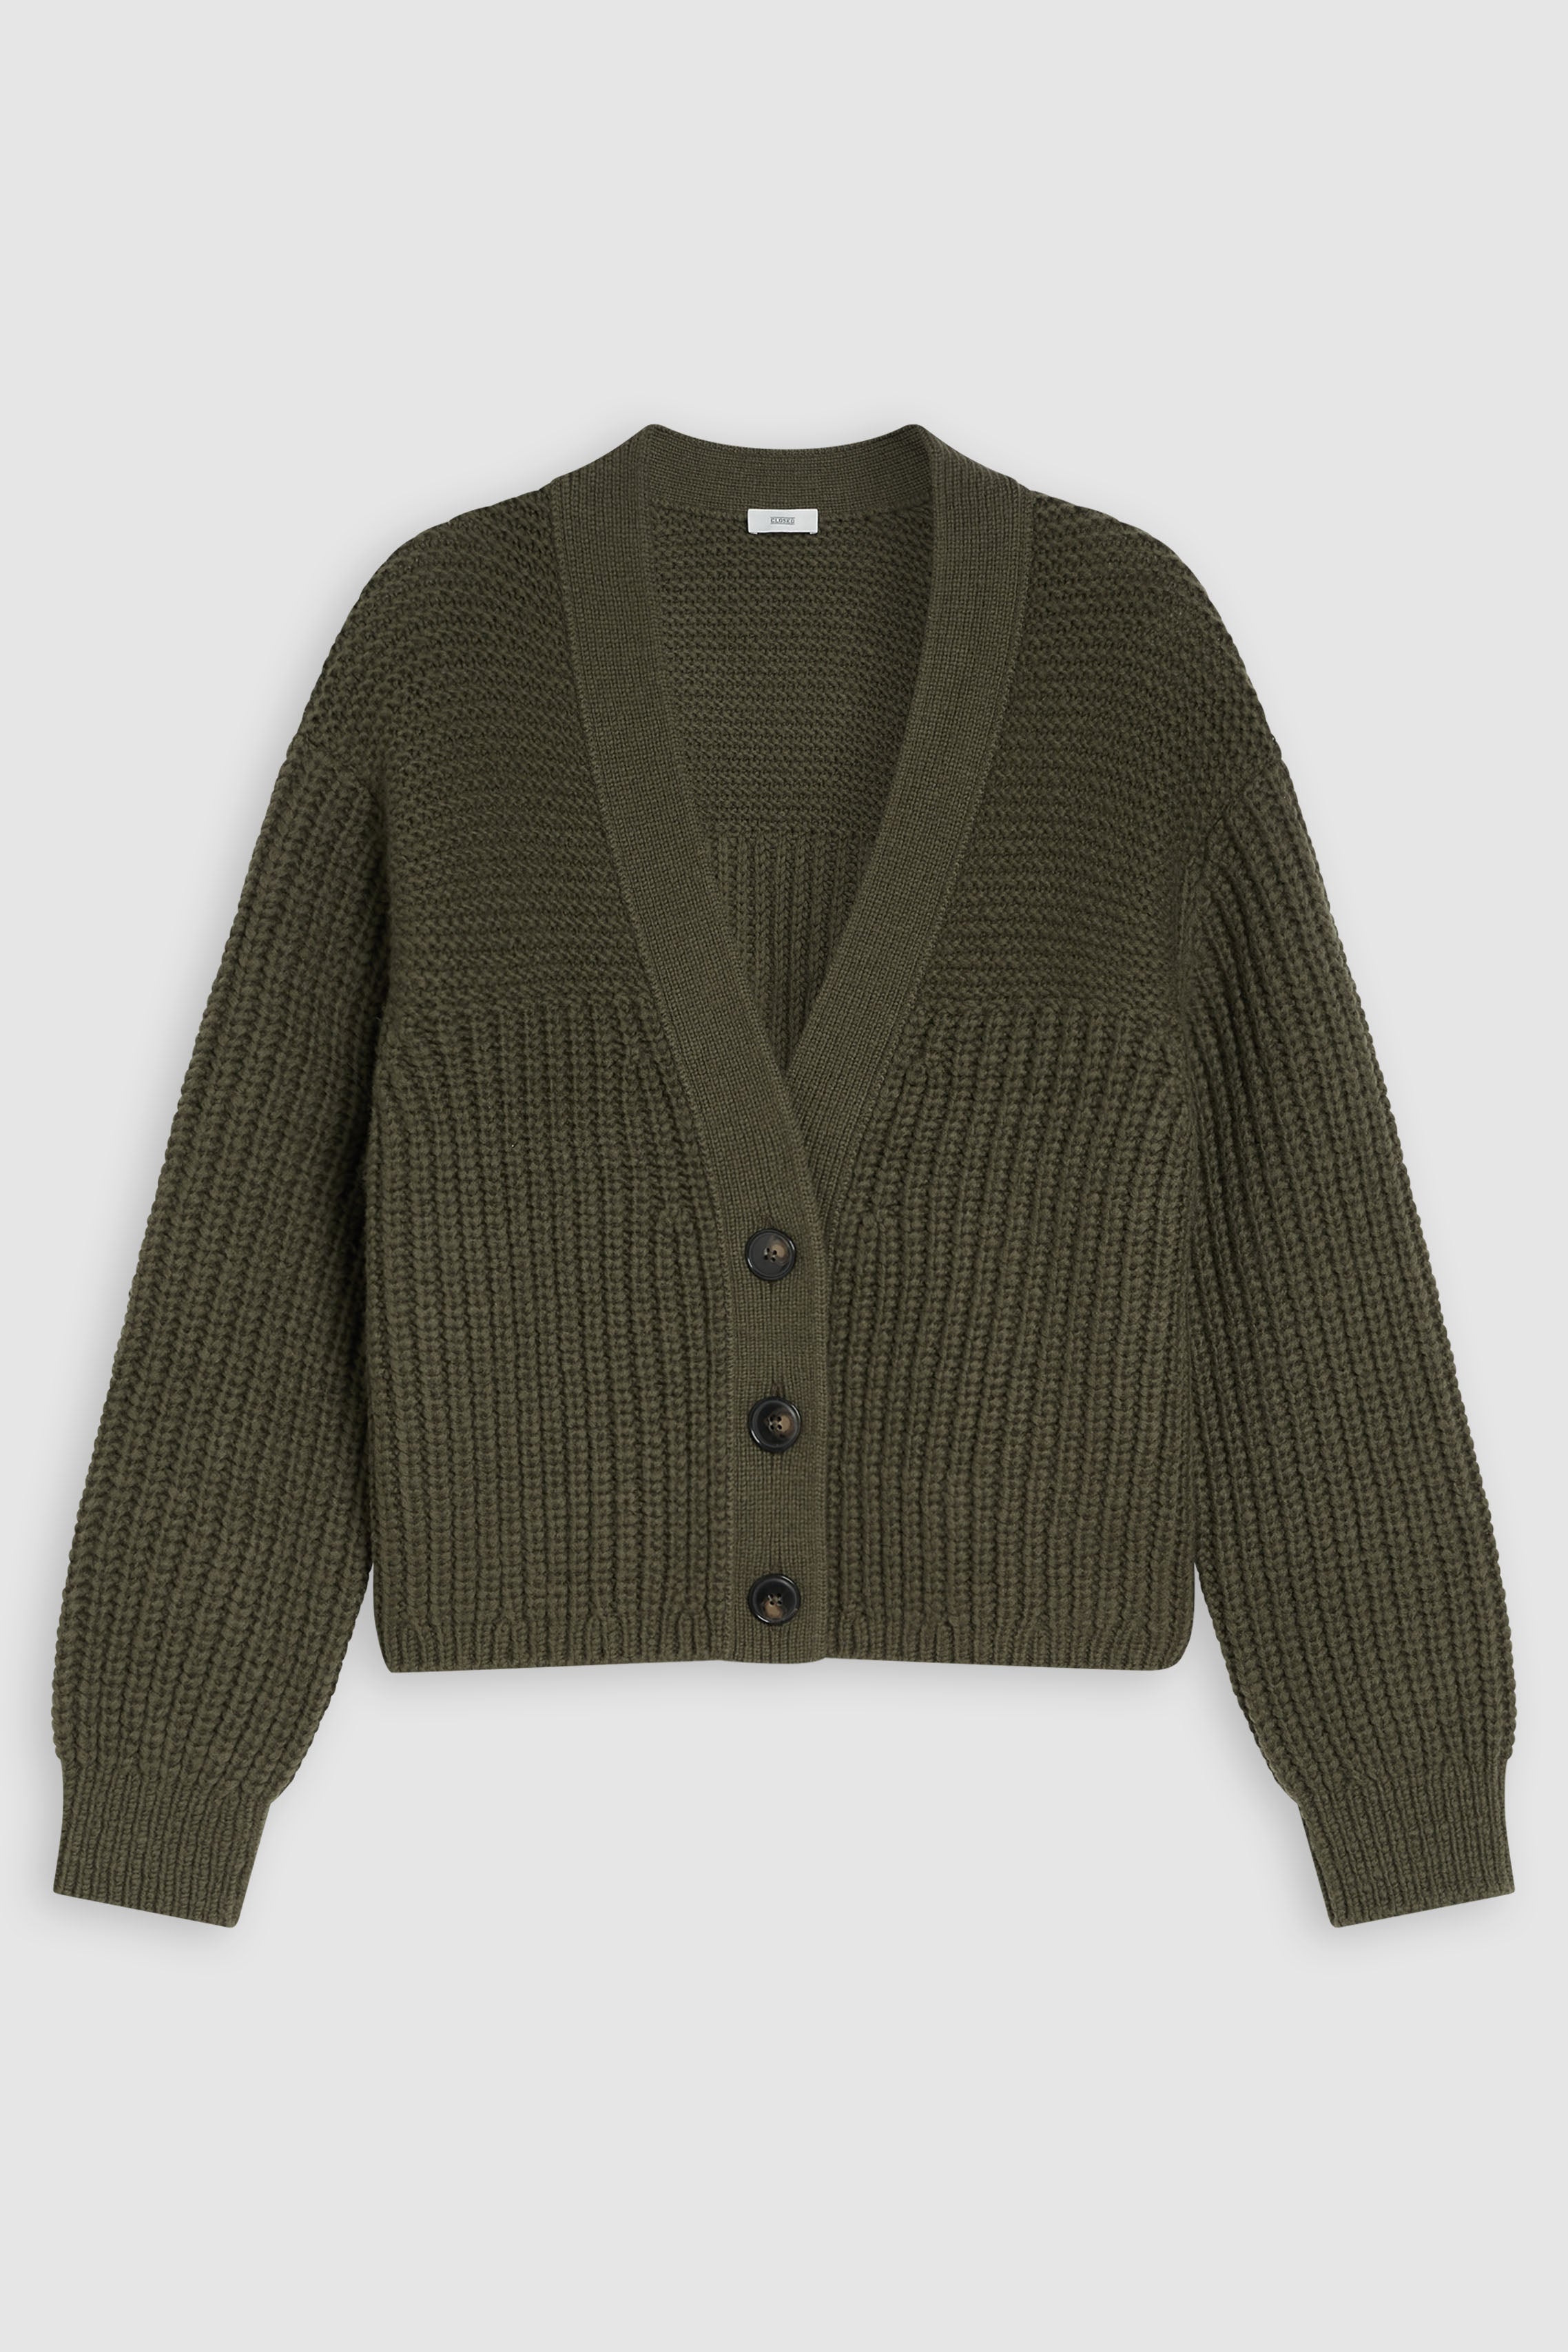 The V Cardigan Long Sleeve from Closed is crafted from a blend of alpaca and polyamide for increased comfort and durability. The chunky knit and reverse knit details provide stylish texture, while the horn look buttons tie the classic aesthetic together. 